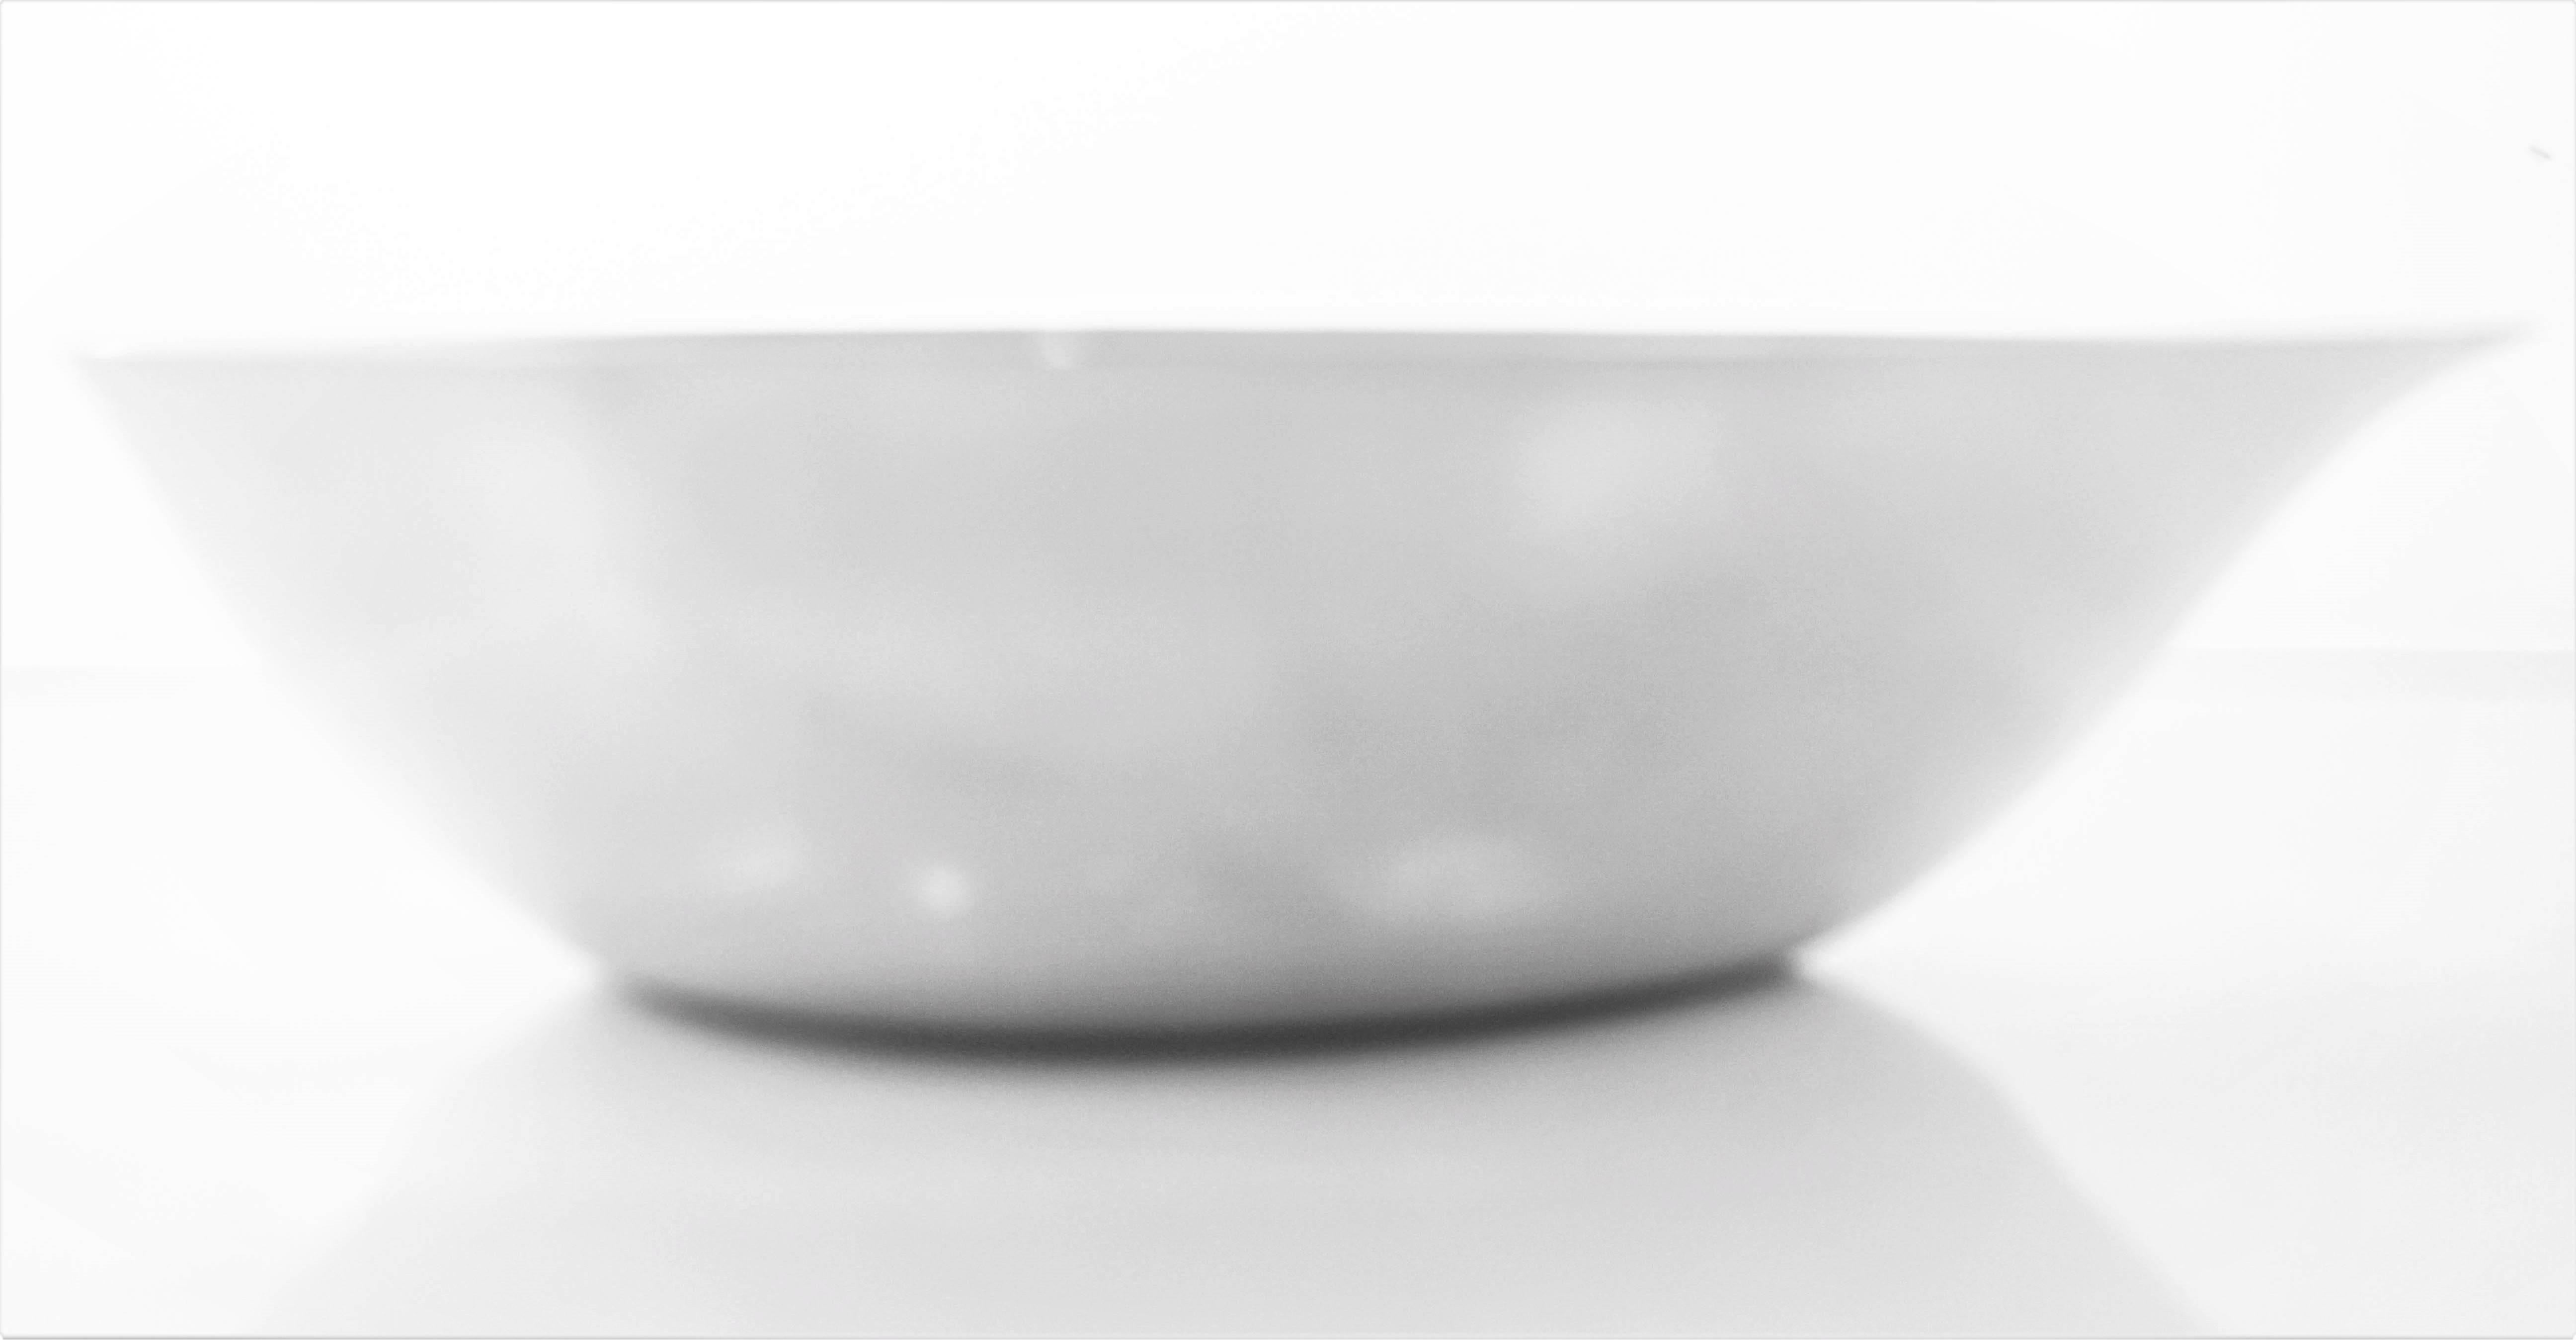 If you are like me, you like the odd and unusual. Here we have a fine example of something different; an abstract shaped bowl. It may look like a triangular shaped but if you look closer you will see that one side isn’t even with the other. It has